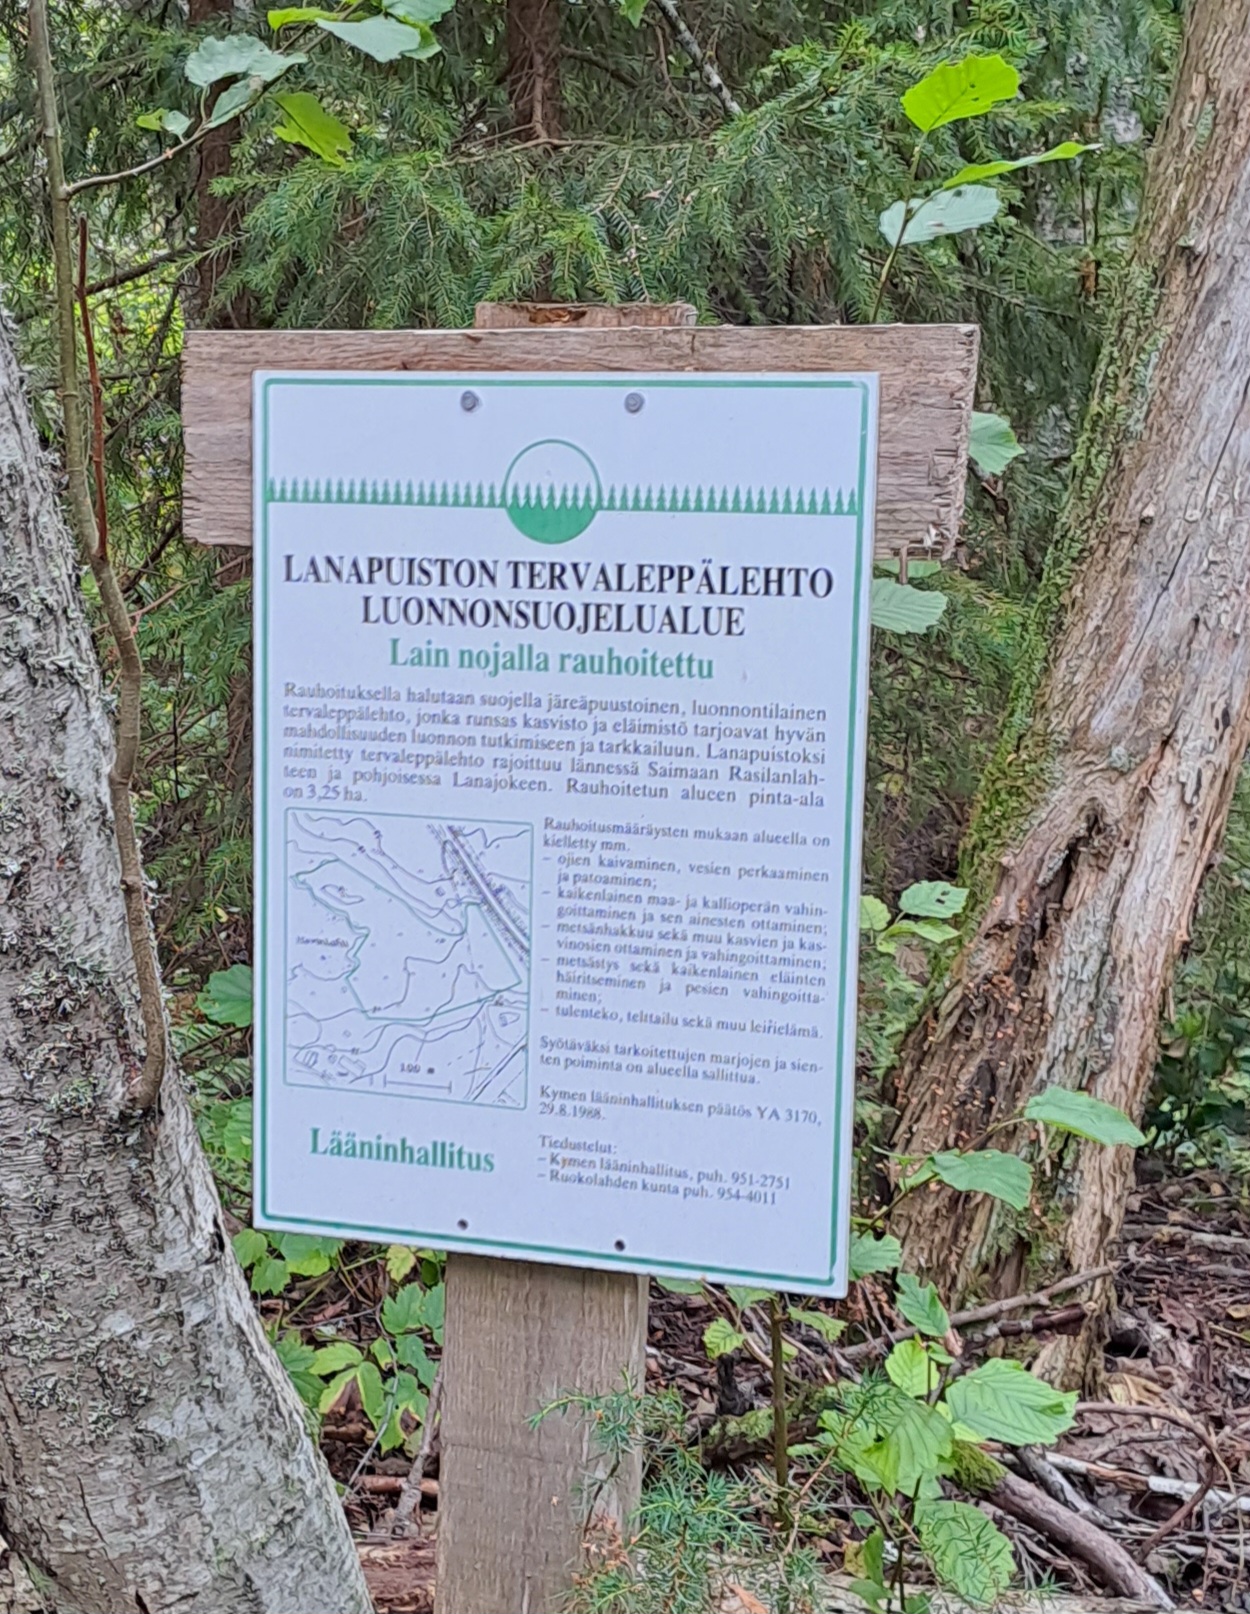 a sign in lanajoki conservation area